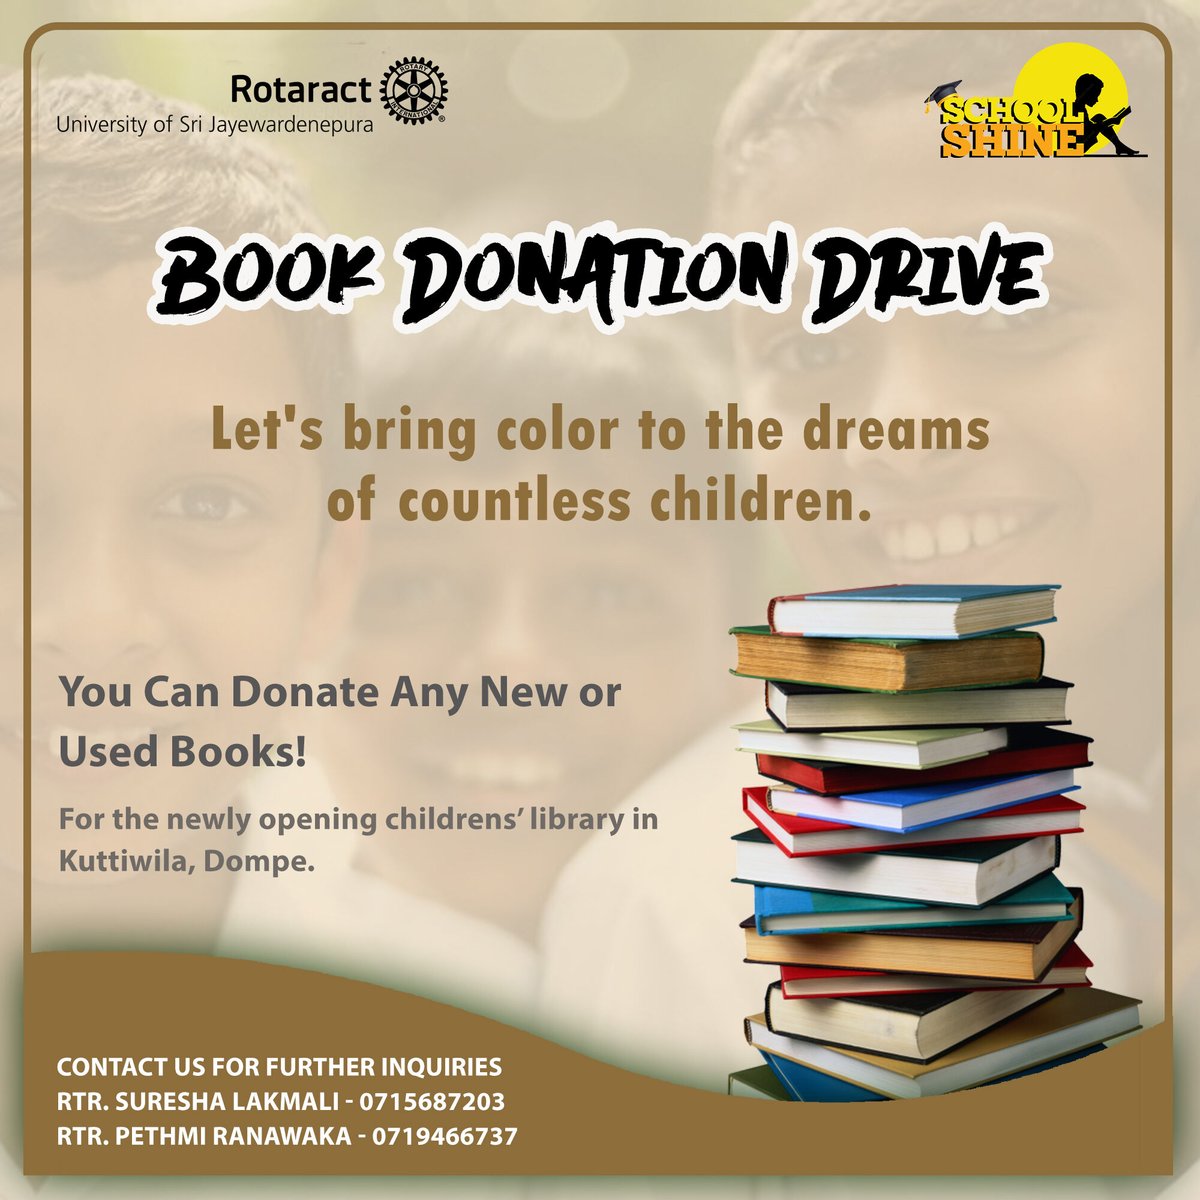 Help us light up young minds!
Donate new or used books to the newly opening children's library in Kuttiwila, Dompe.🤩📚

Donate here: cutt.ly/rw7OhaPi

#schoolshine
#RACUSJ
#Rotaract
#Rotaract3220
#CreateHopeintheWorld
#YouthForAll